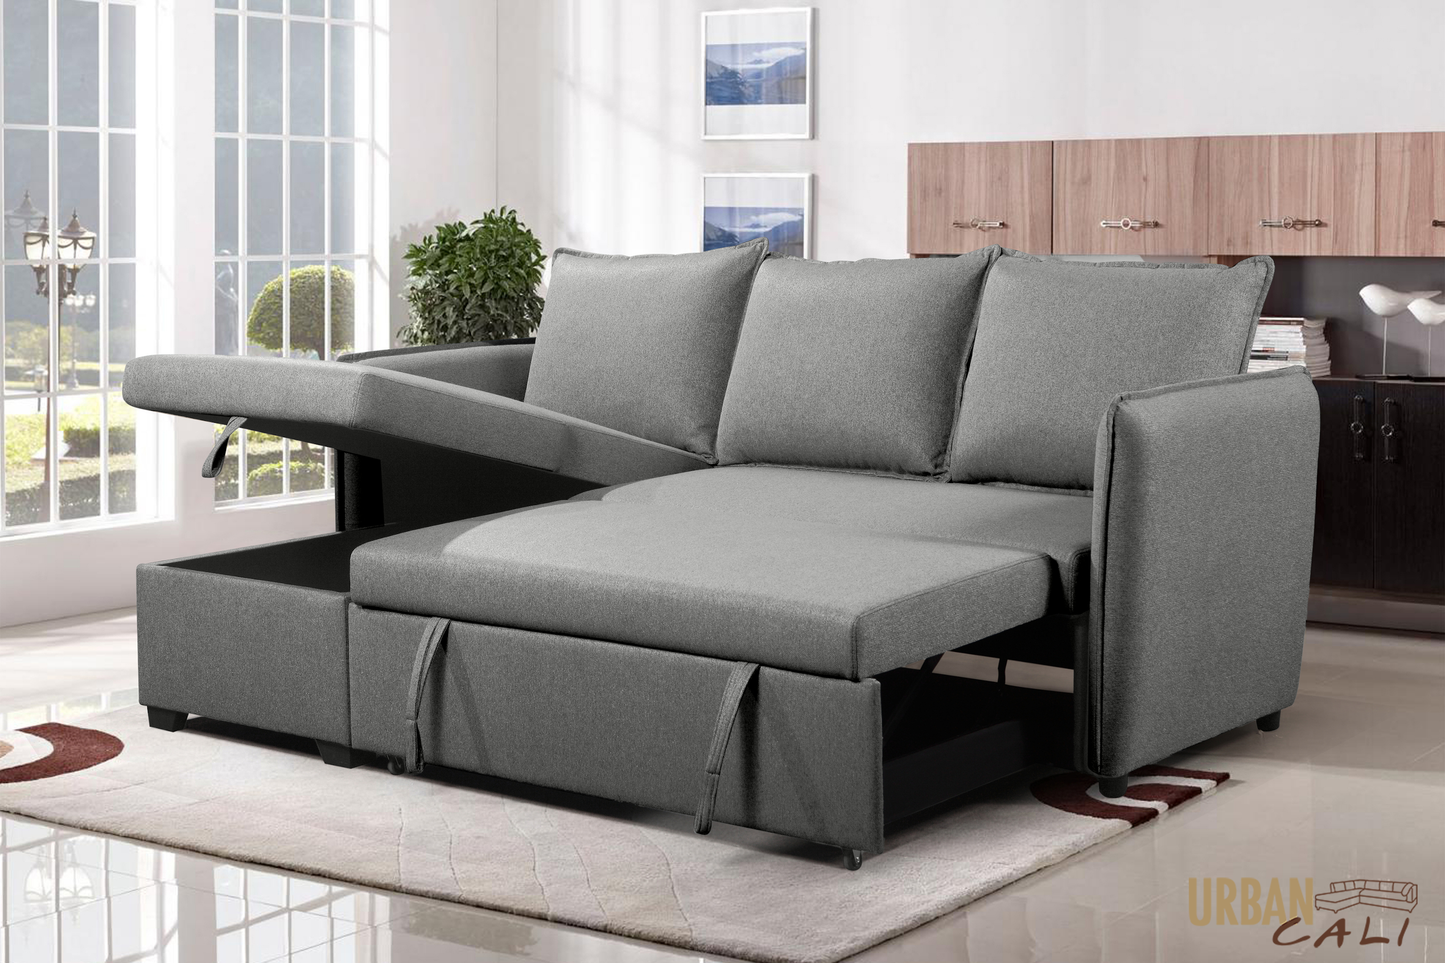 Laguna Sleeper Sectional Sofa Bed with Reversible Storage Chaise in Nela Ash